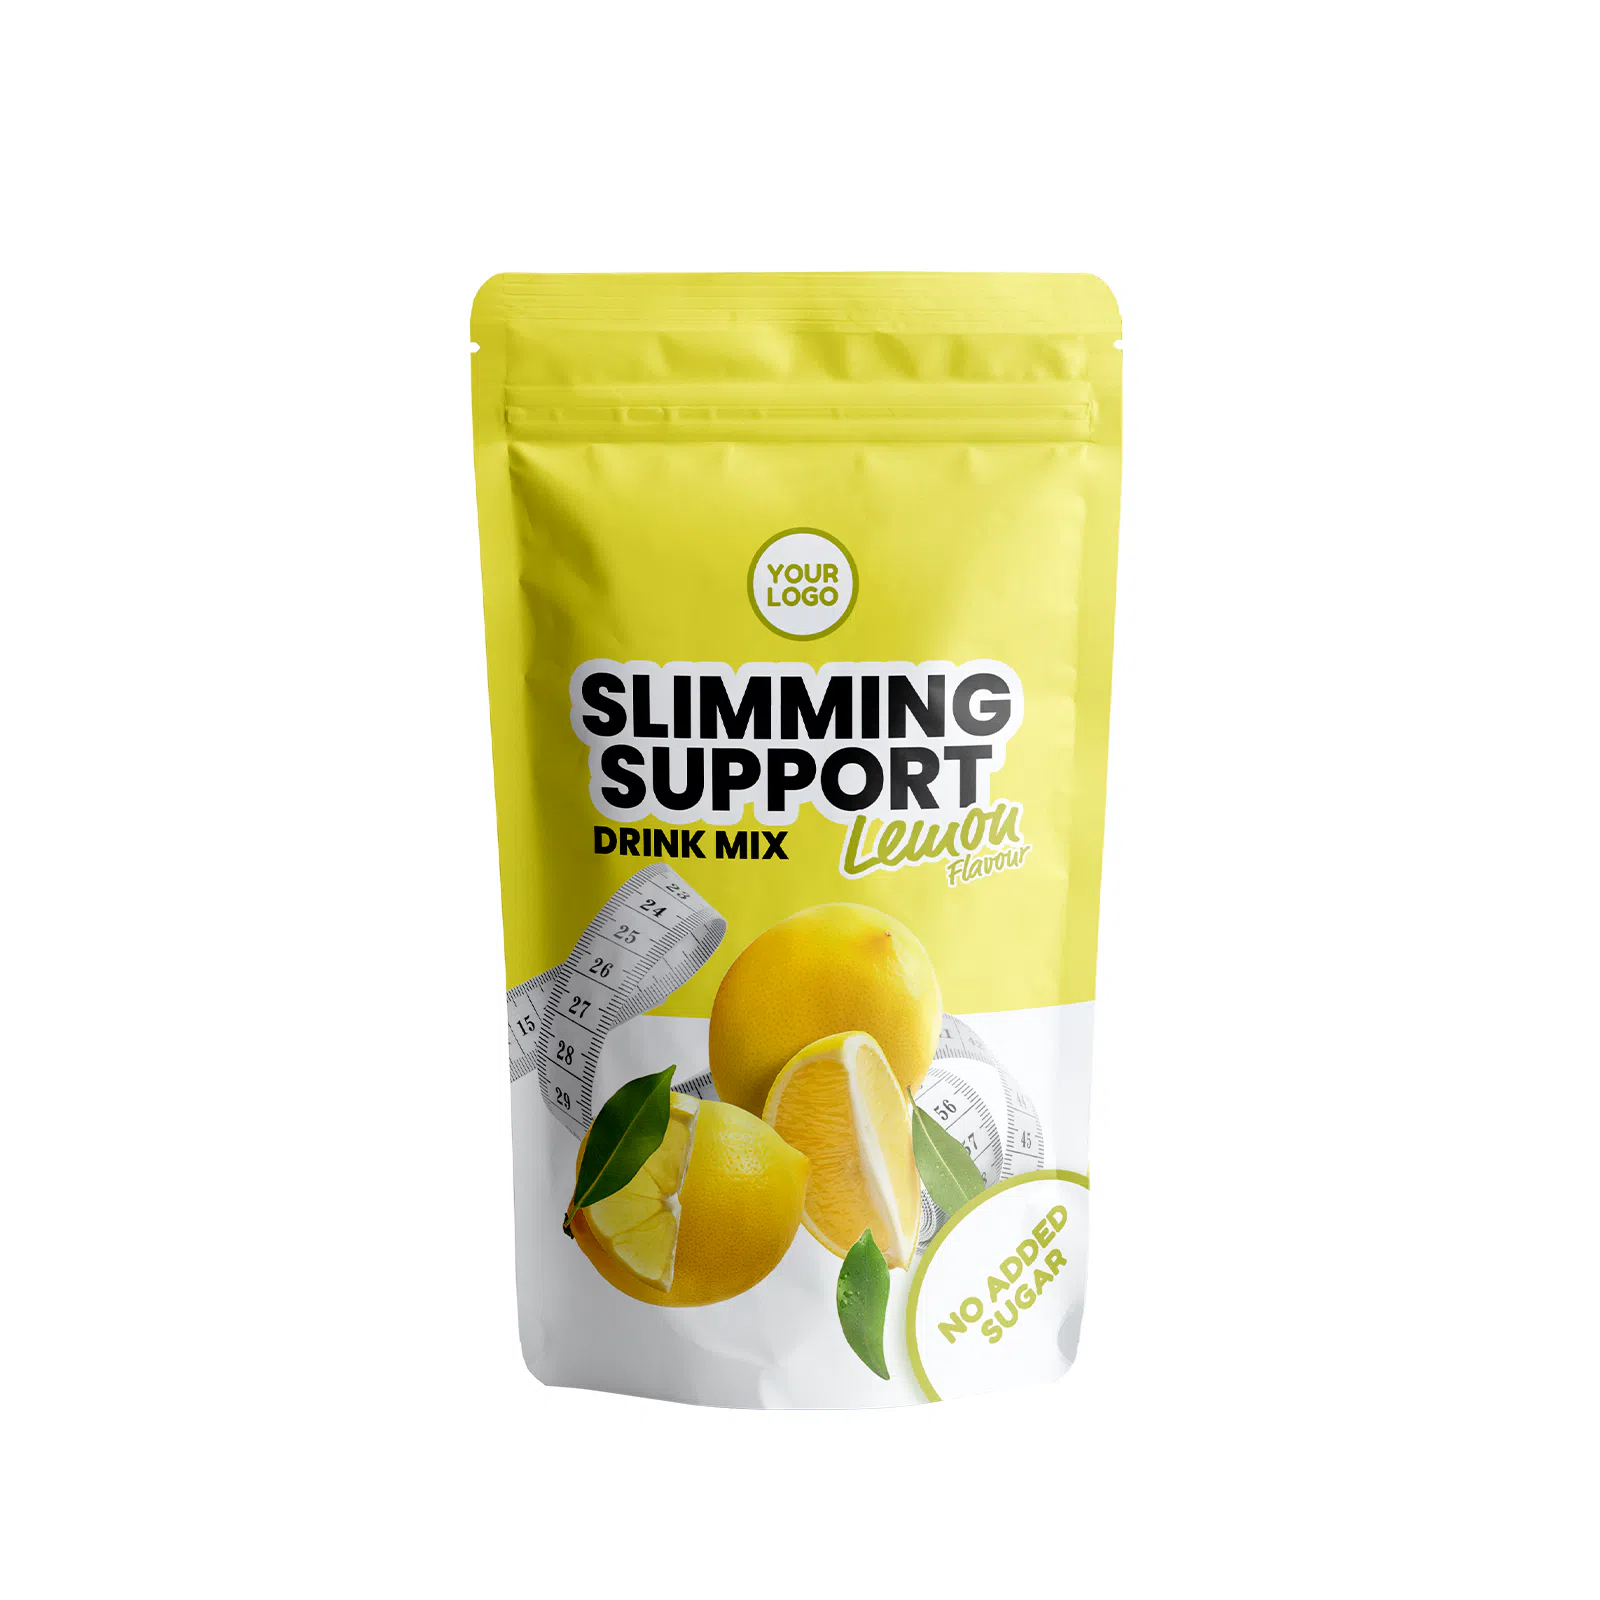 Private label amerpharma slimming supporting drink mix powder with glukomannan konjac in 100g fully printed doypack, lemon flavor